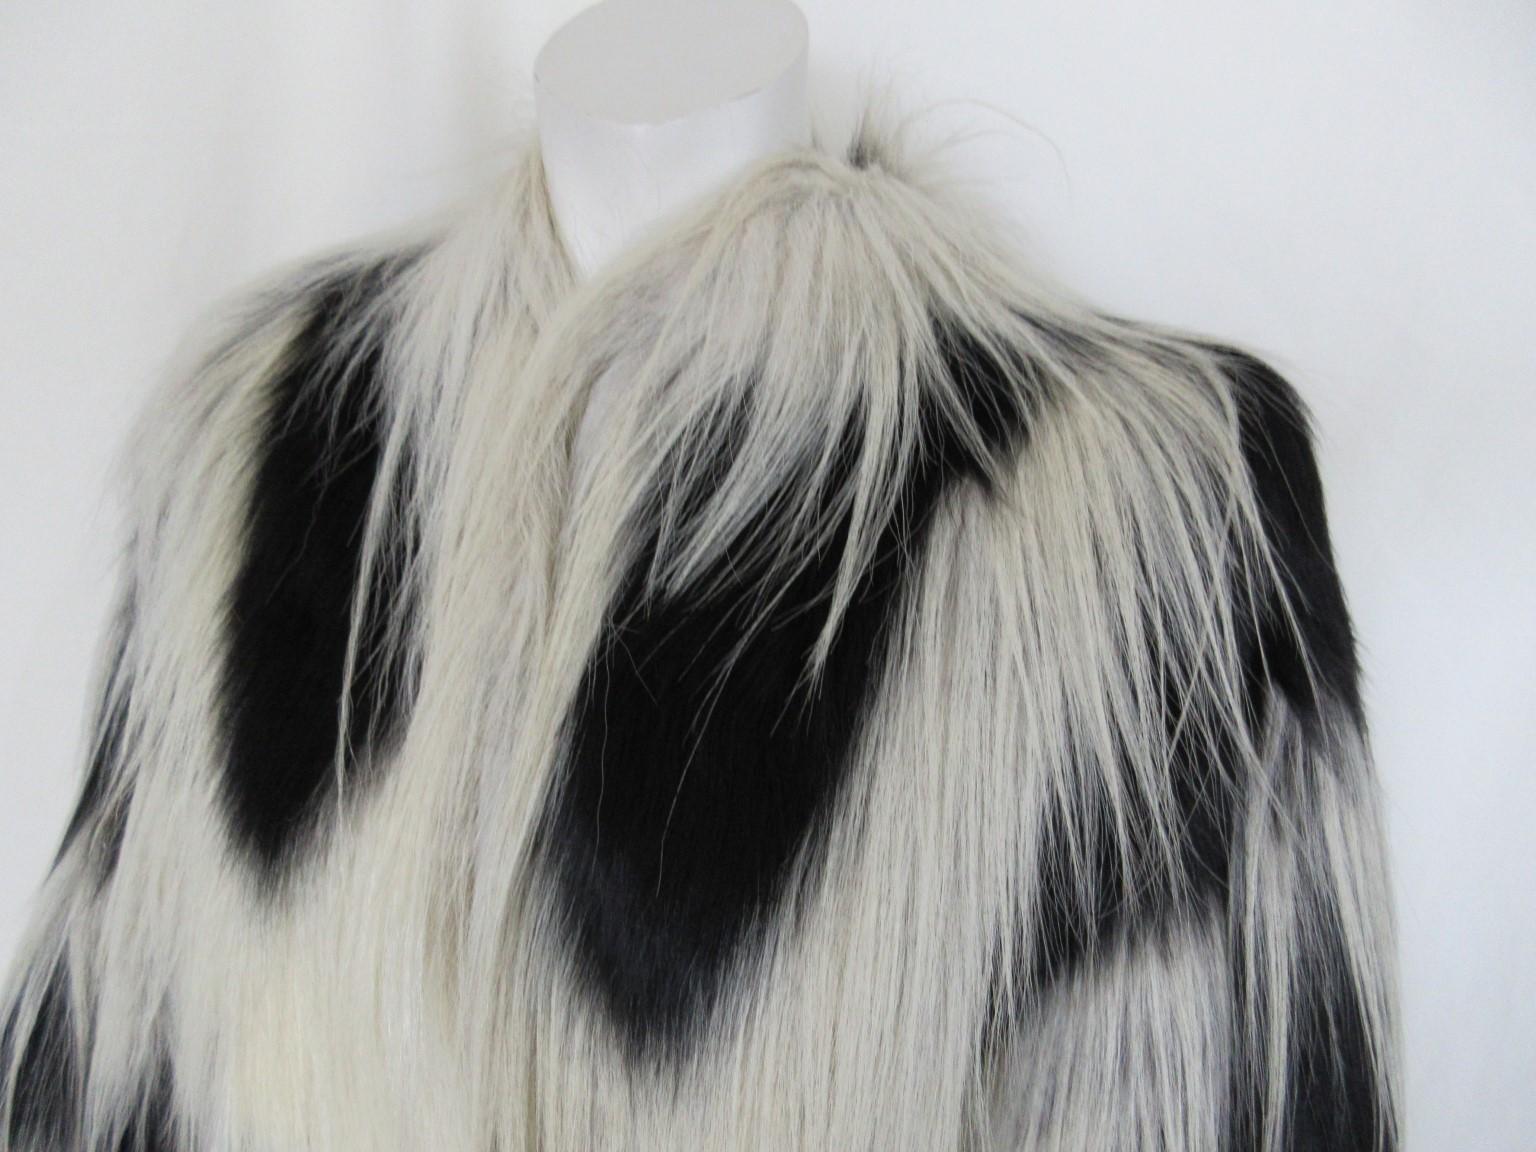 Vintage yak fur cape designed by Claude Litz, Paris

We offer more exclusive vintage items, view our frontstore

Details:
Black lining
2 pockets
Side leather closing straps
3 closing hooks
Can be worn by men or women /unisex

Please note that